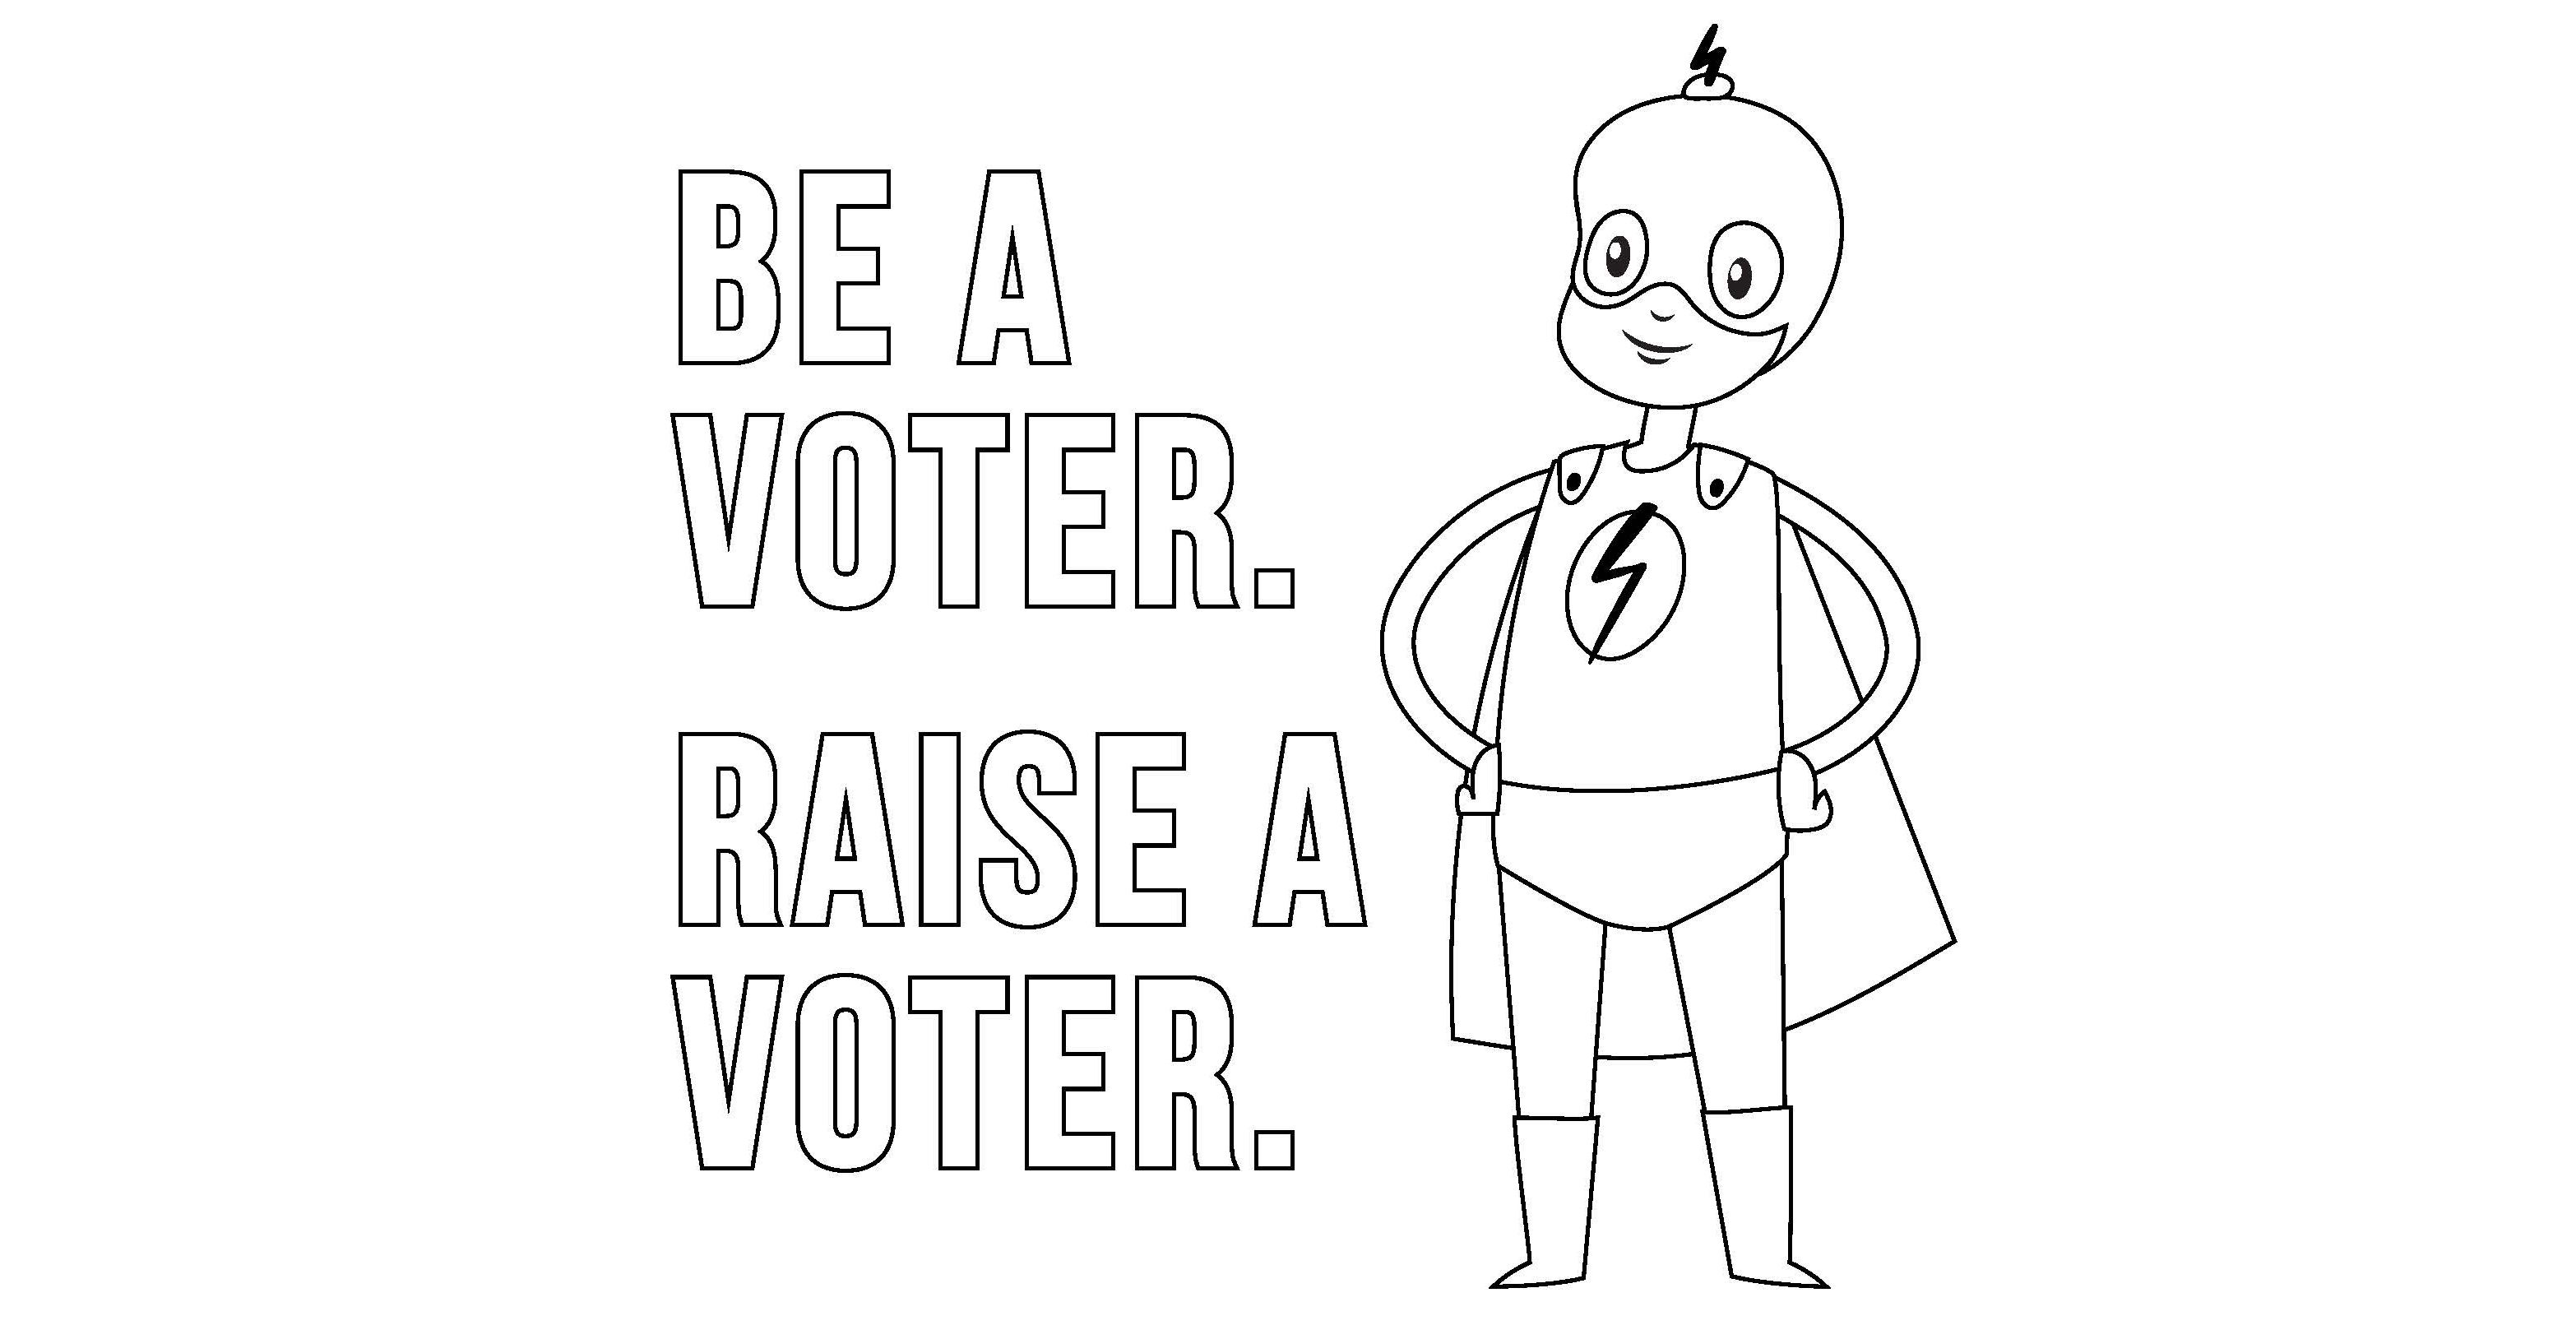 Bilingual Coloring Pages Show Kids the Power of Voting | Salud America